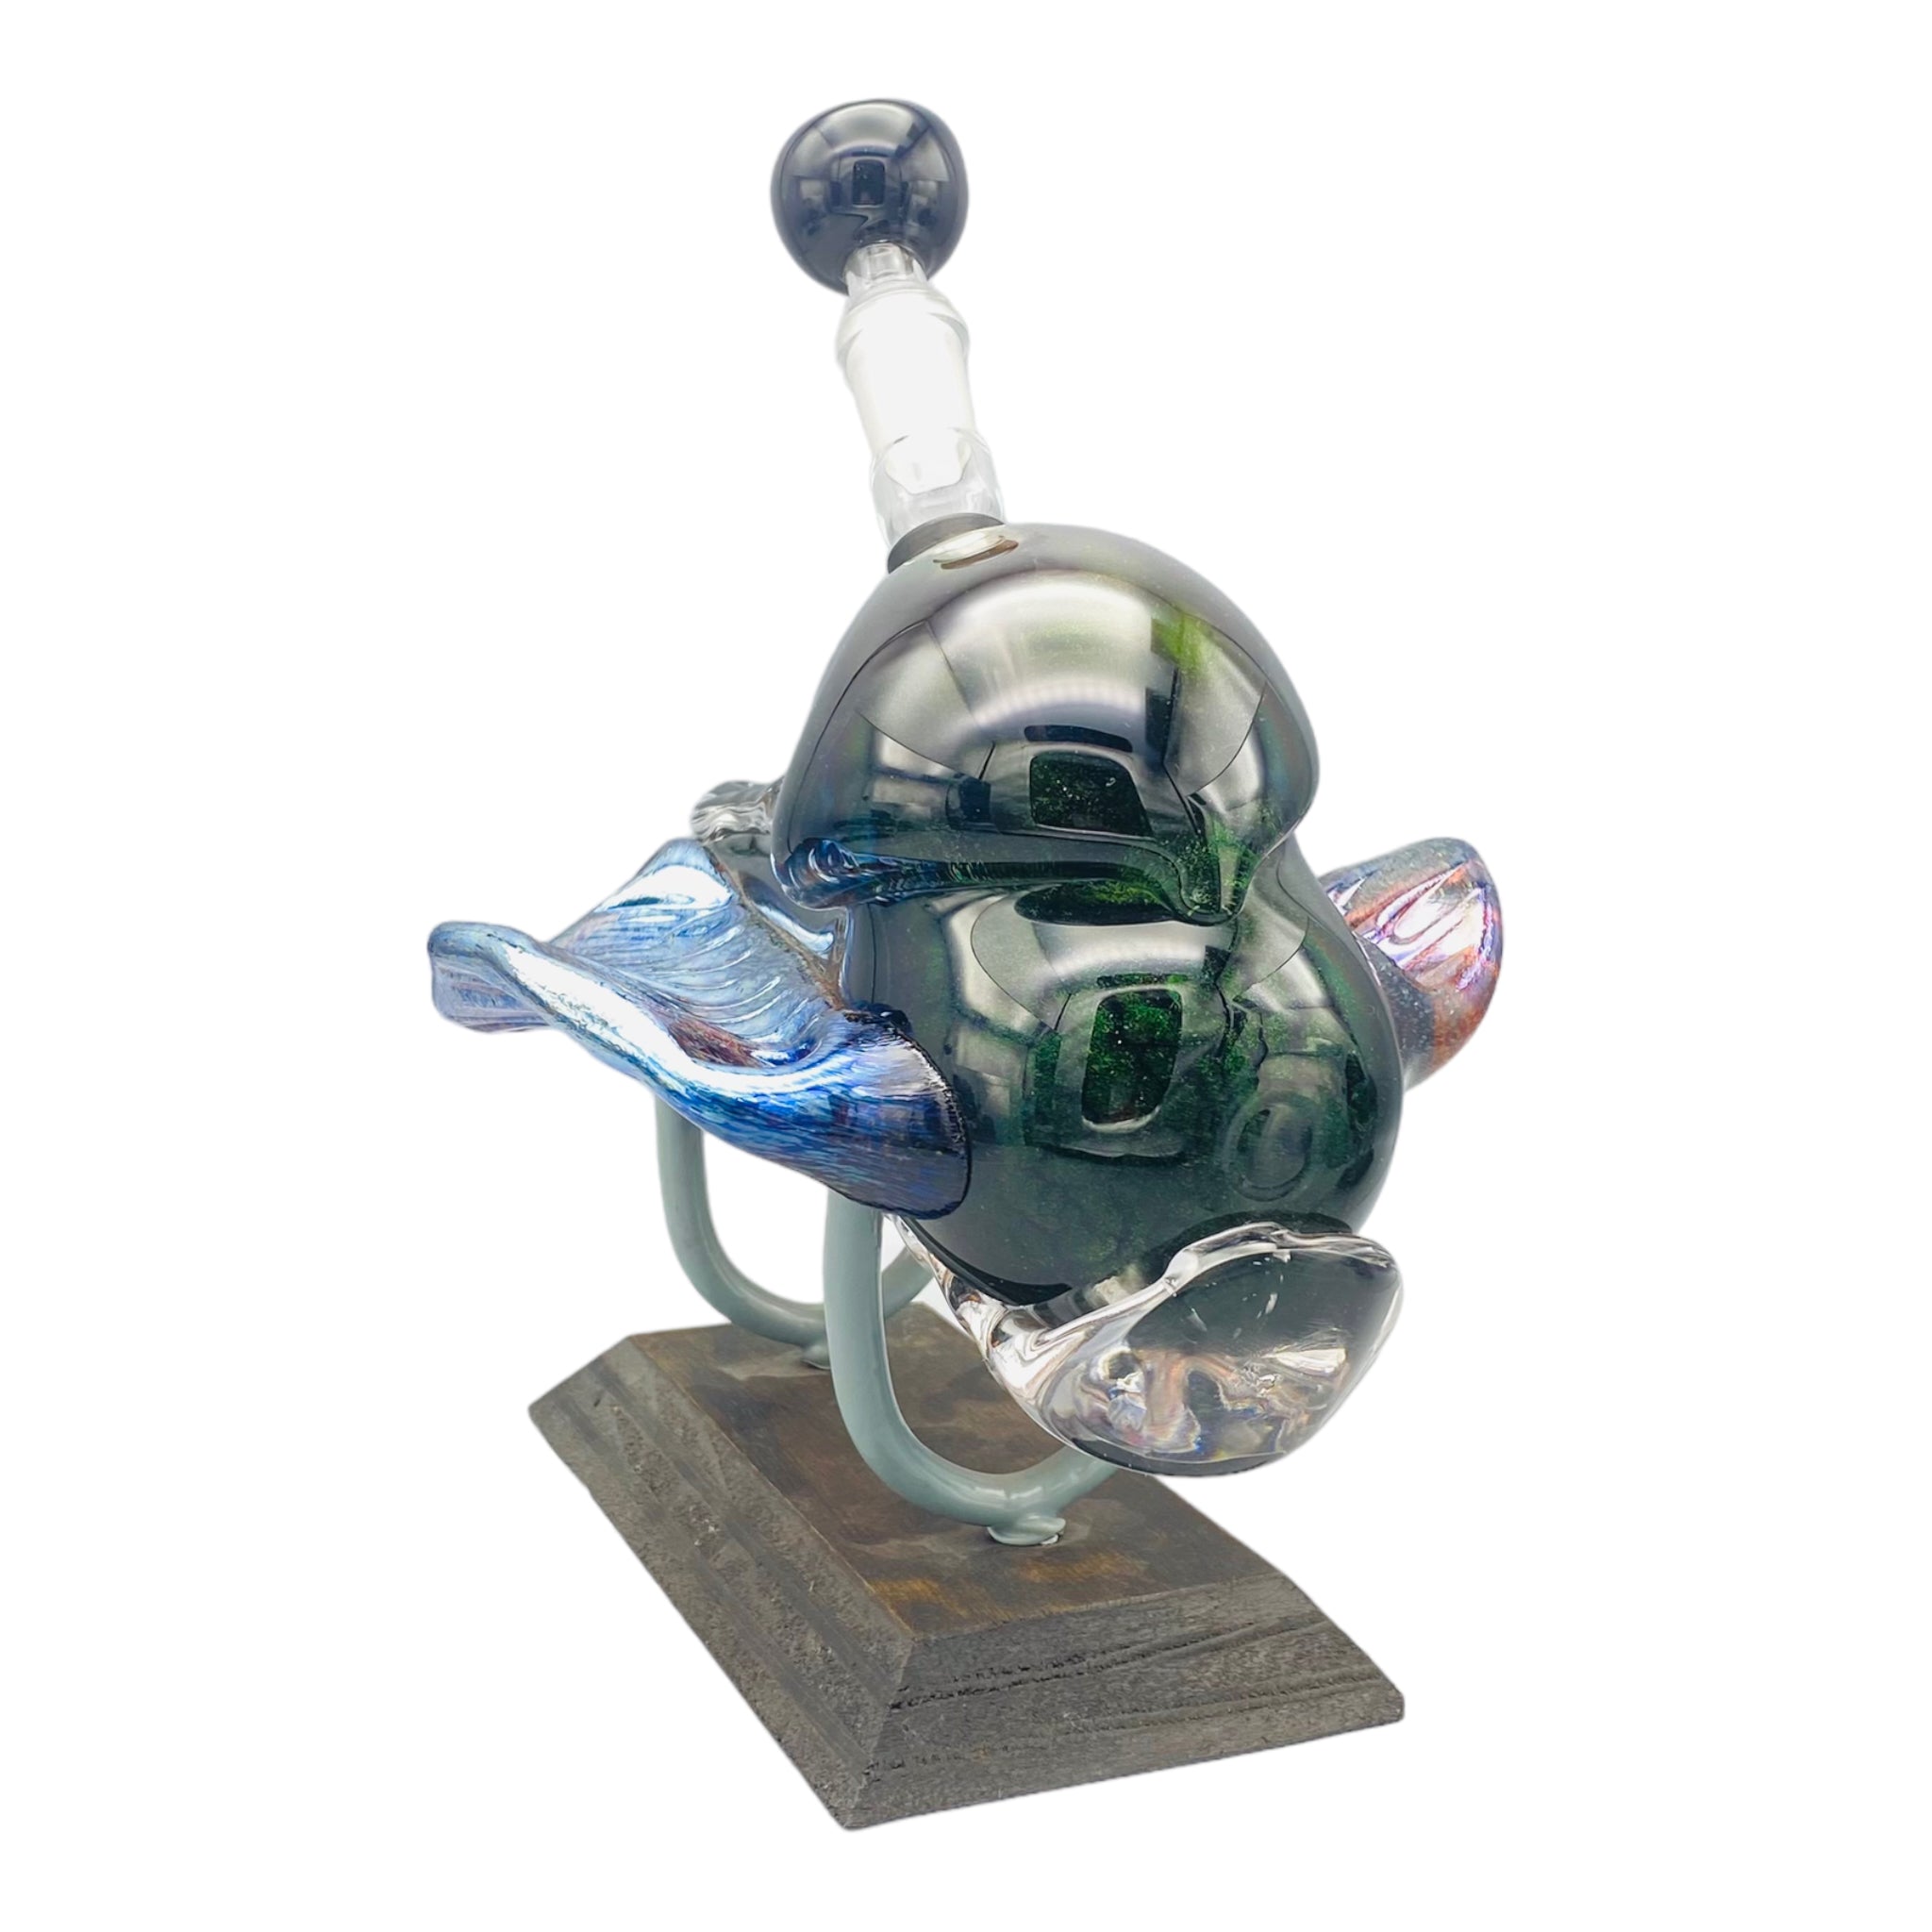 soft glass dab rig with under water creature look